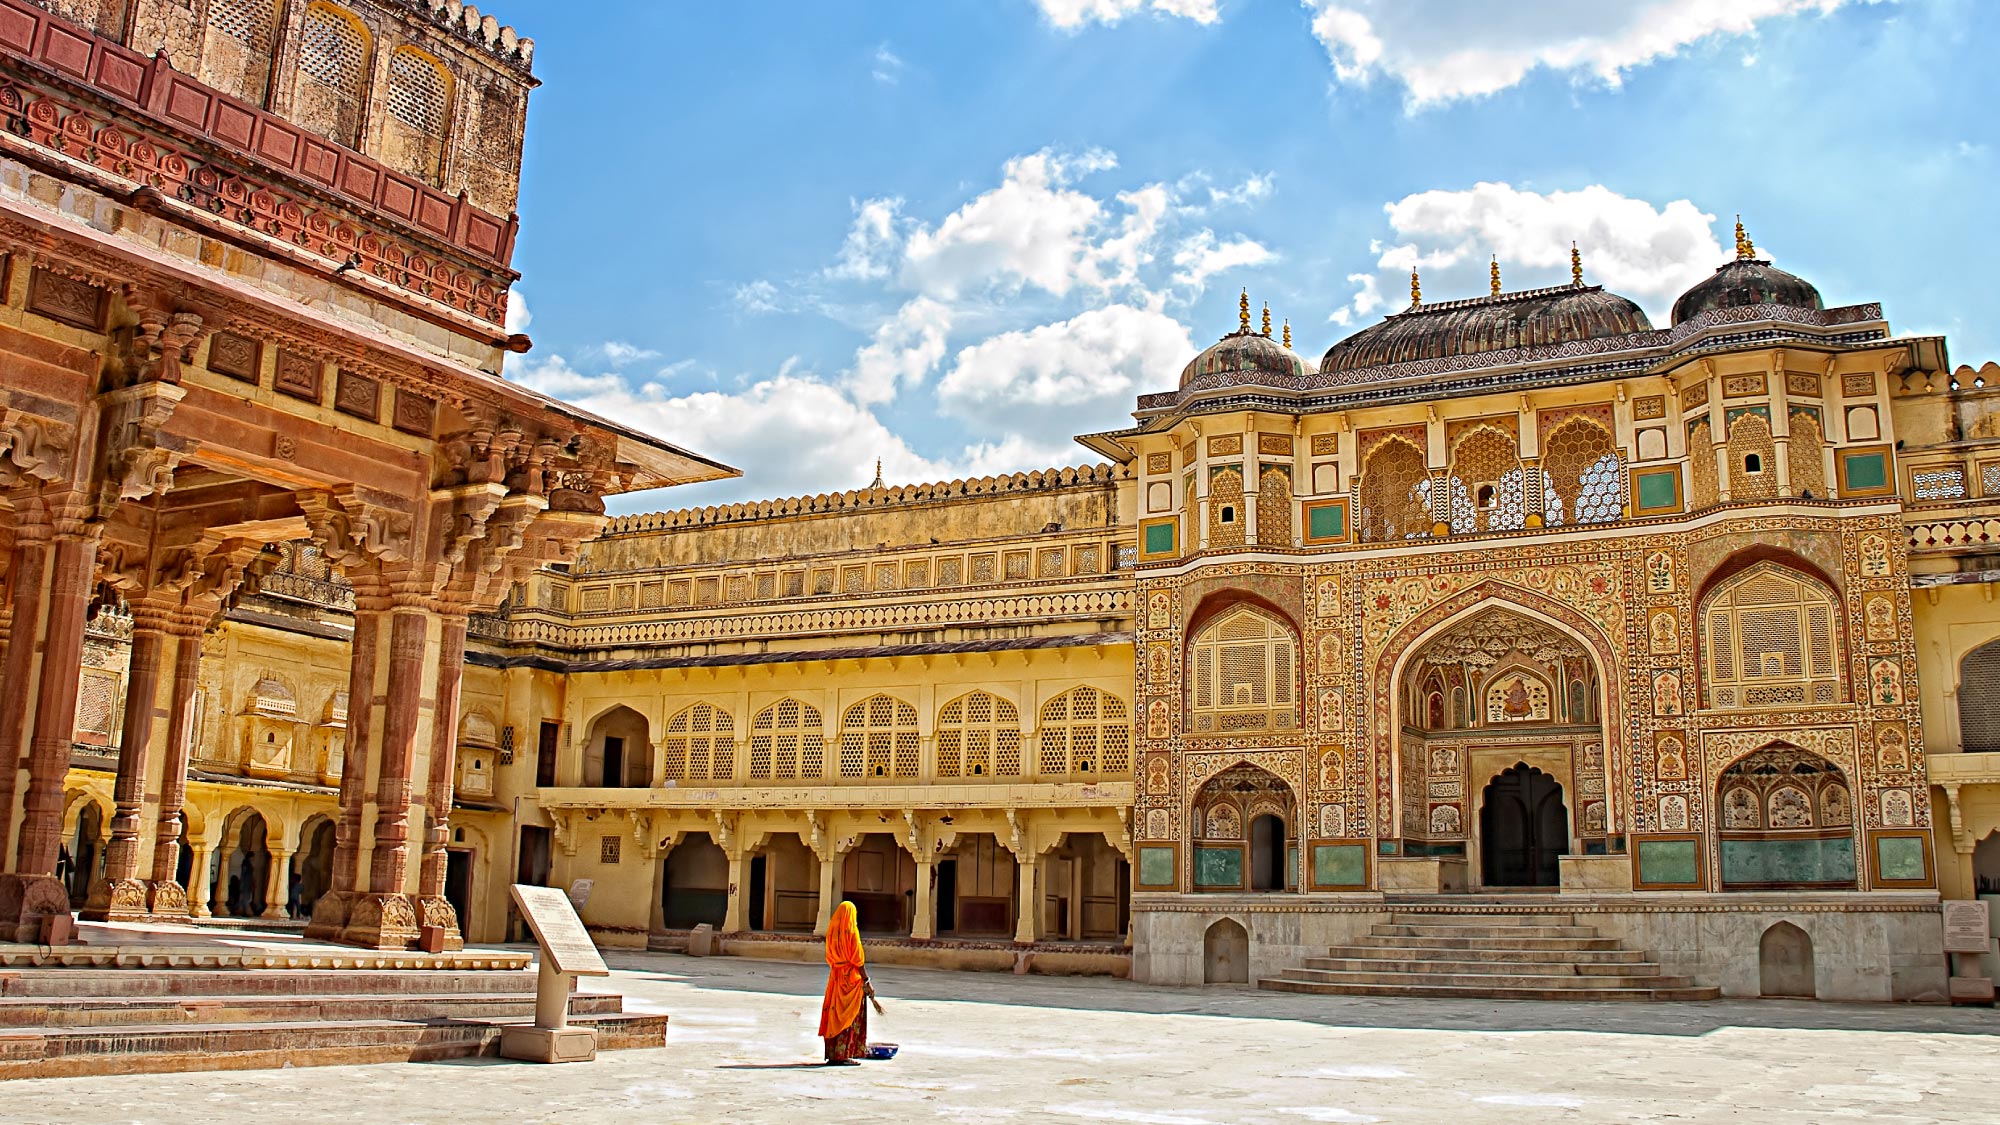 Capture the vibrant charm of Jaipur in India, a captivating stop on the journey to Australia spanning 21 countries, tailored for self-flying pilots. Immerse yourself in the rich history, colorful culture, and stunning architecture of the famed 'Pink City